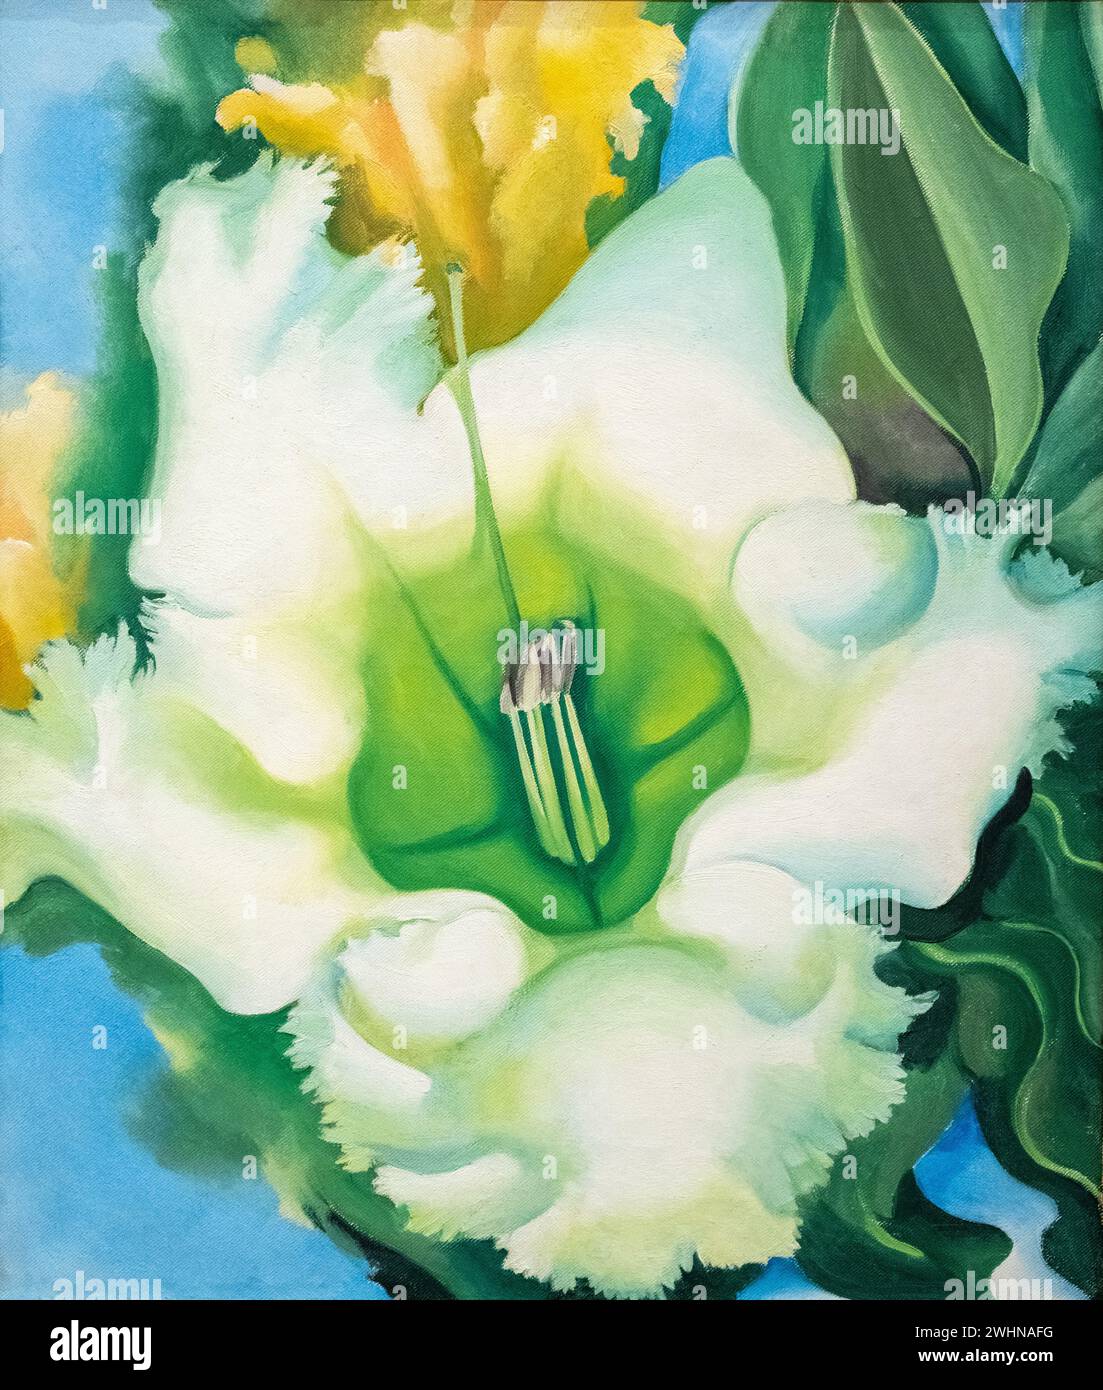 Georgia O'Keeffe 1939 oil on canvas painting 'Cup of Silver Ginger' at the Baltimore Museum of Art Stock Photo